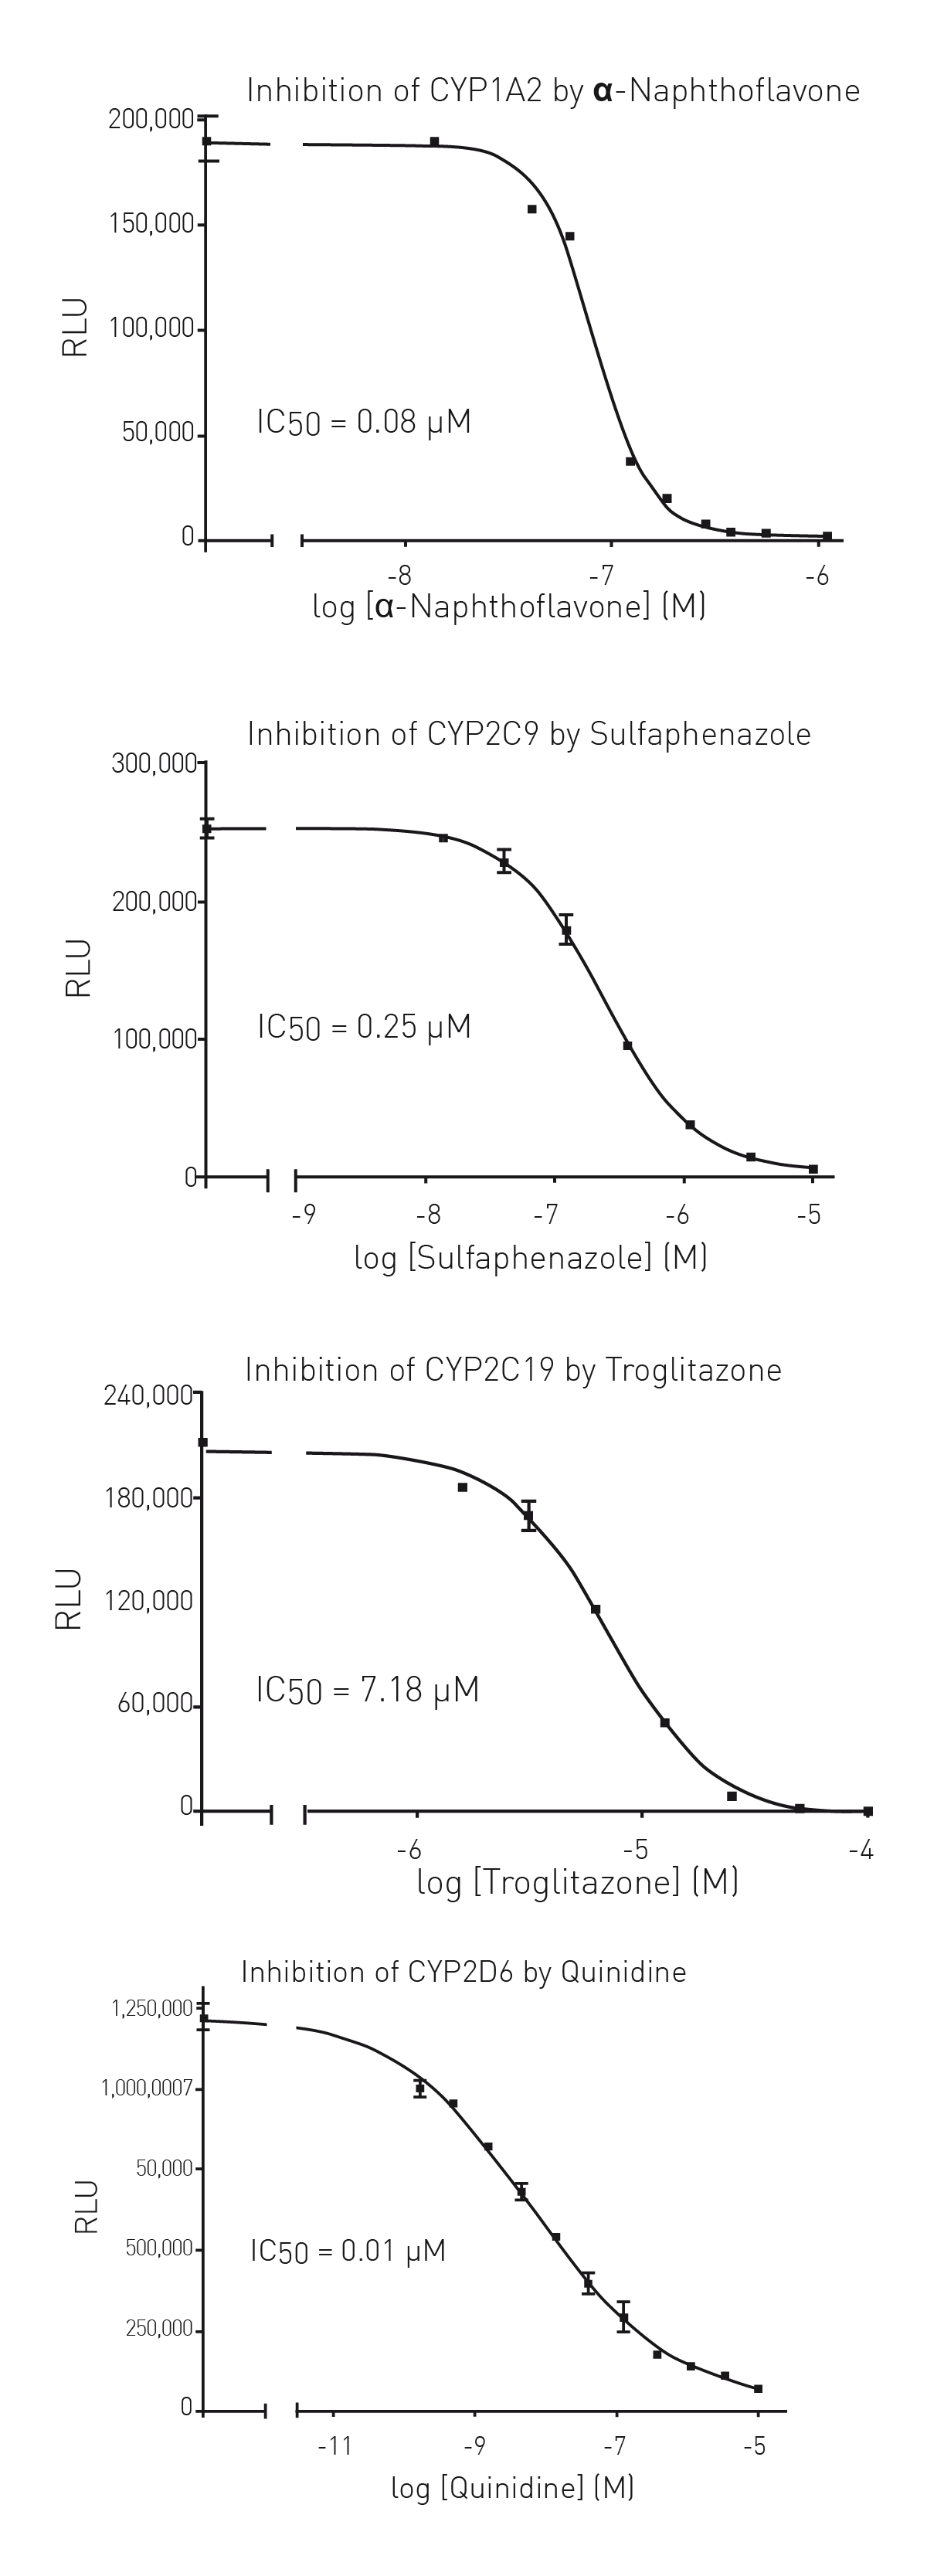 Fig. 3: P450-Glo IC50 calculations for CYP450 enzymes (CYP1A2, 2C9, 2C19, and 2D6) and their respective inhibitors (α-naphthoﬂ avone, sulfaphenazole, troglitazone, and quinidine)